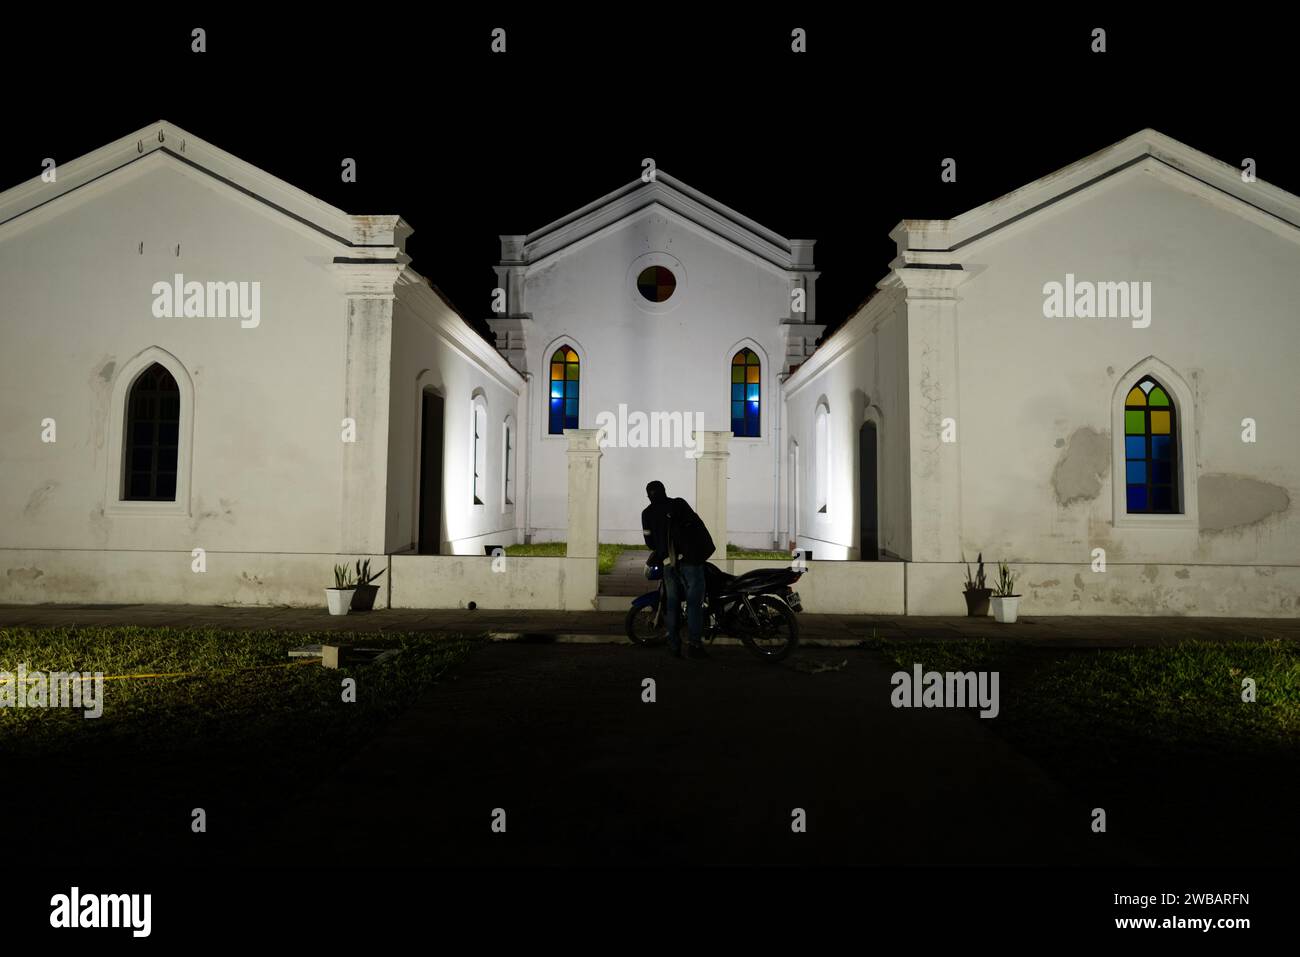 A stunning white church building illuminated at night in Quelimane, Mozambique Stock Photo